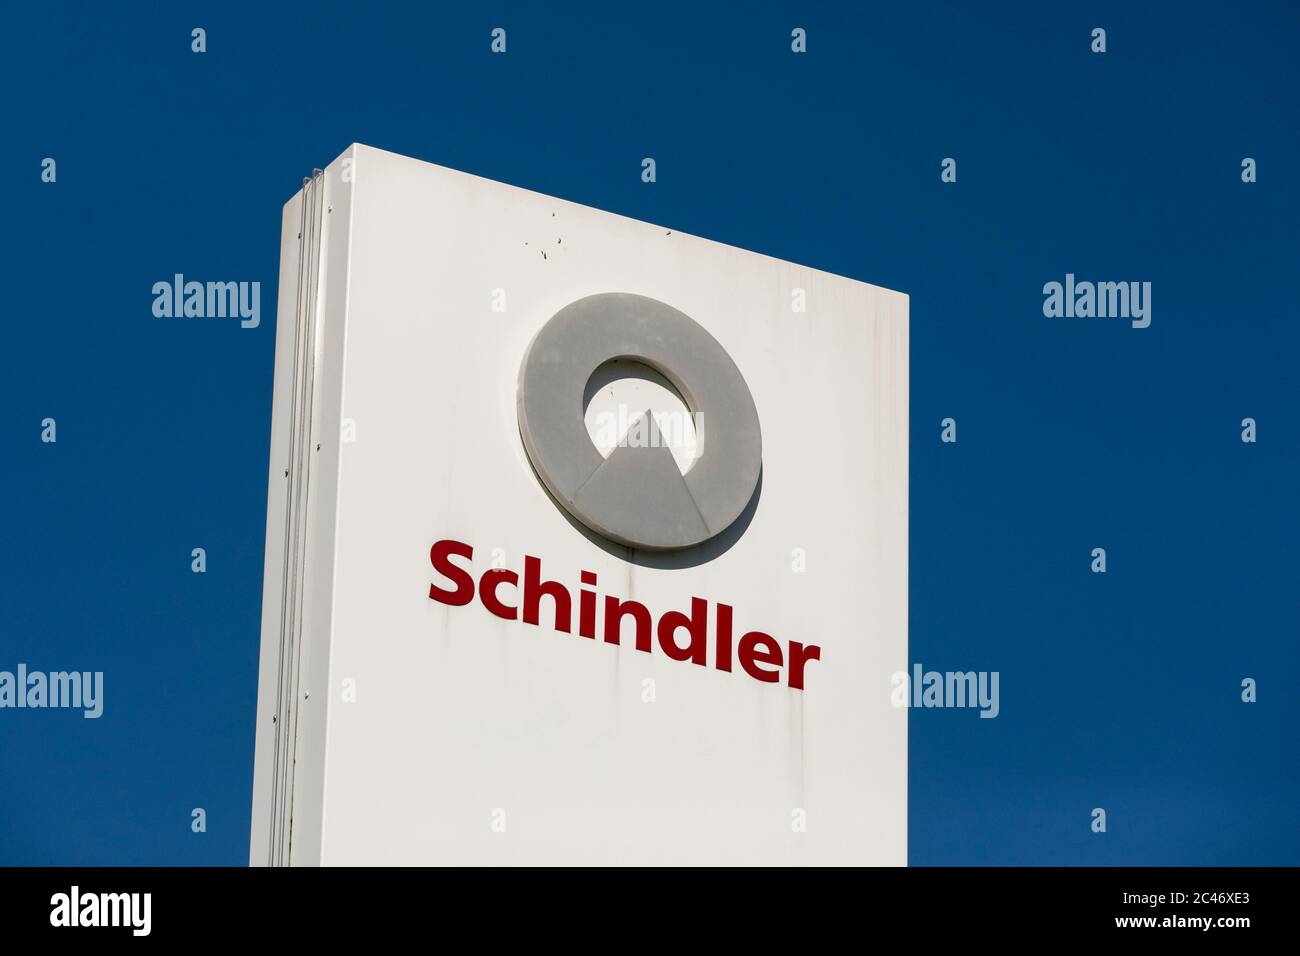 A logo sign outside of a facility occupied by Schindler Elevator Corporation in Hanover, Pennsylvania on June 12, 2020. Stock Photo